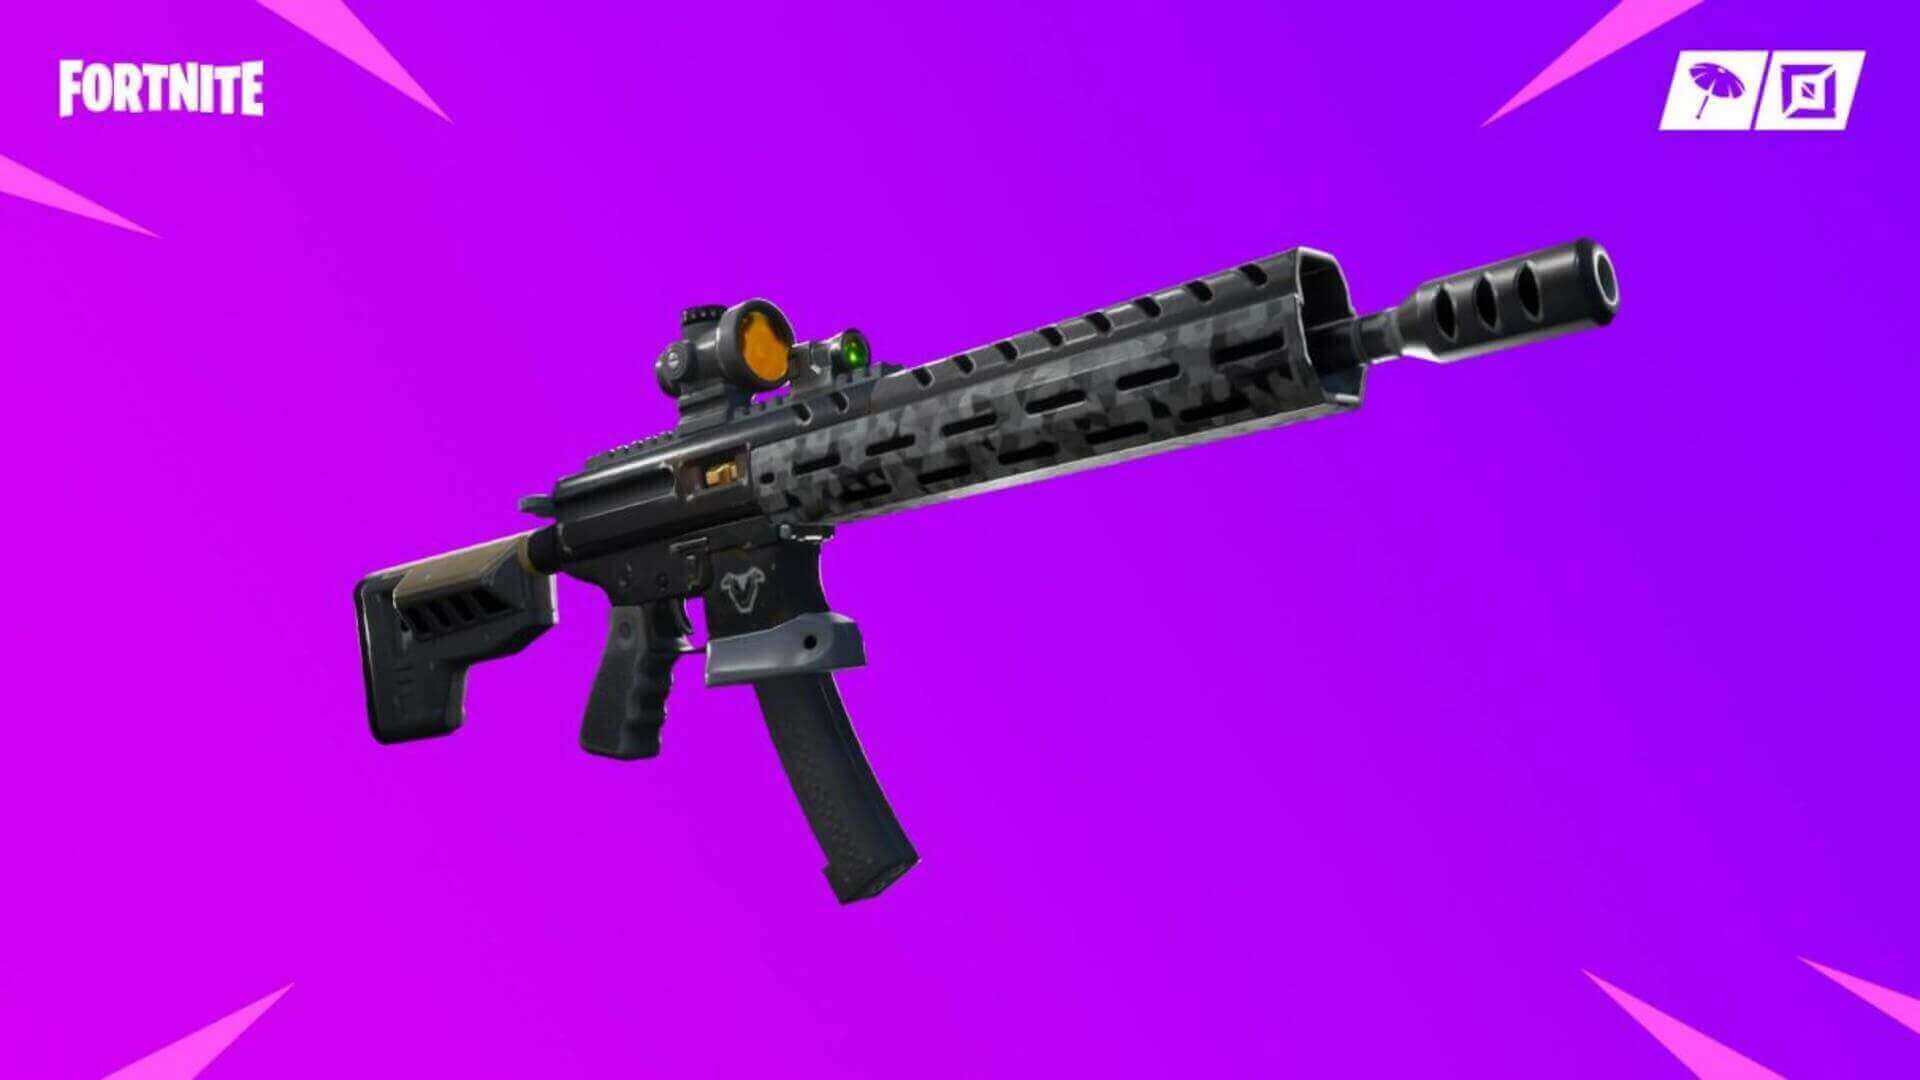 Weapon Attachments Can Come to Fortnite